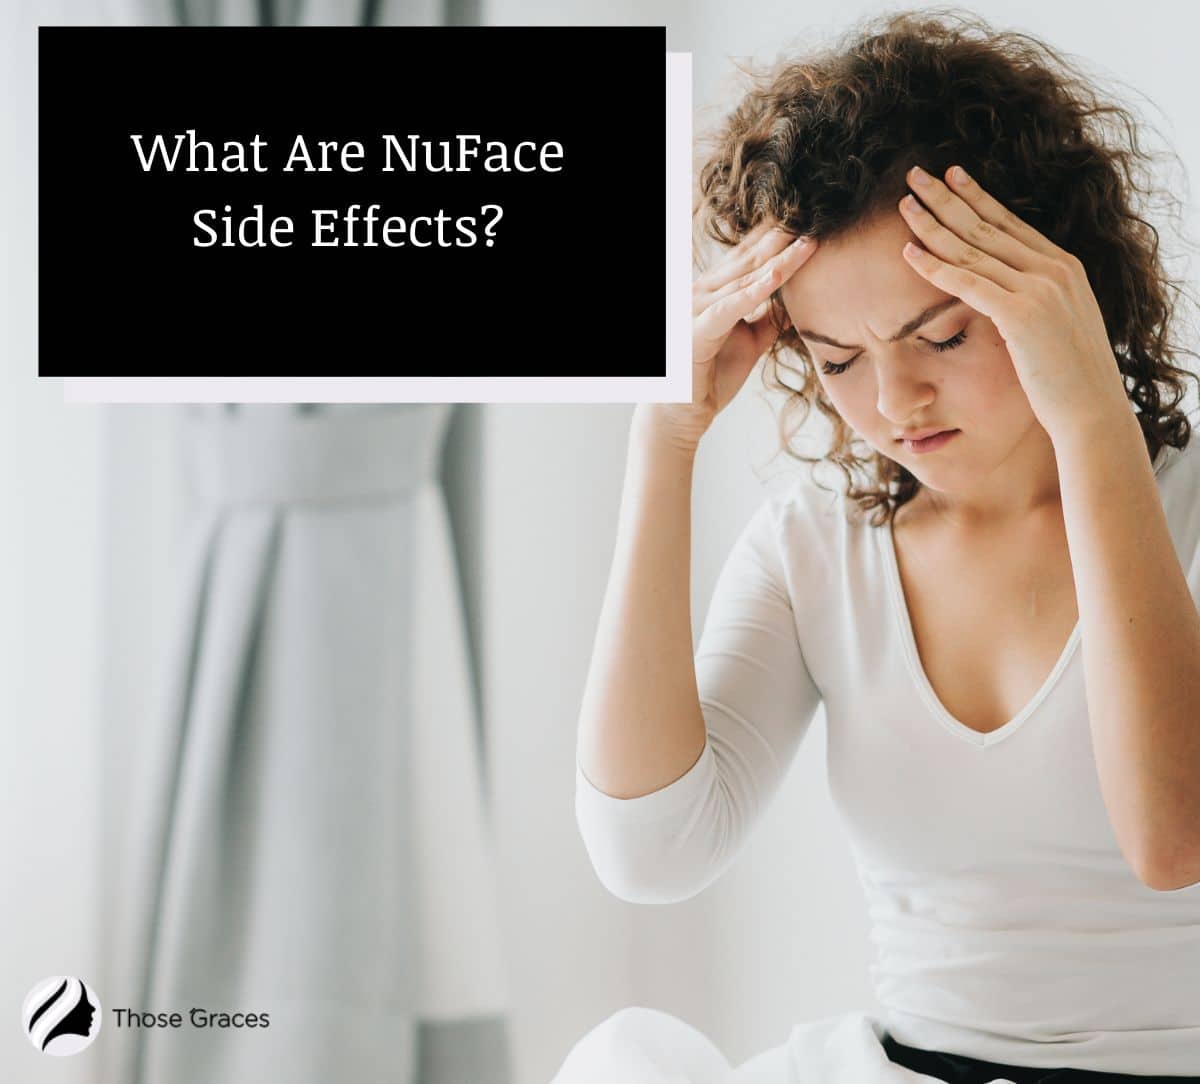 lady having a headache, one of the nuface microcurrent side effects